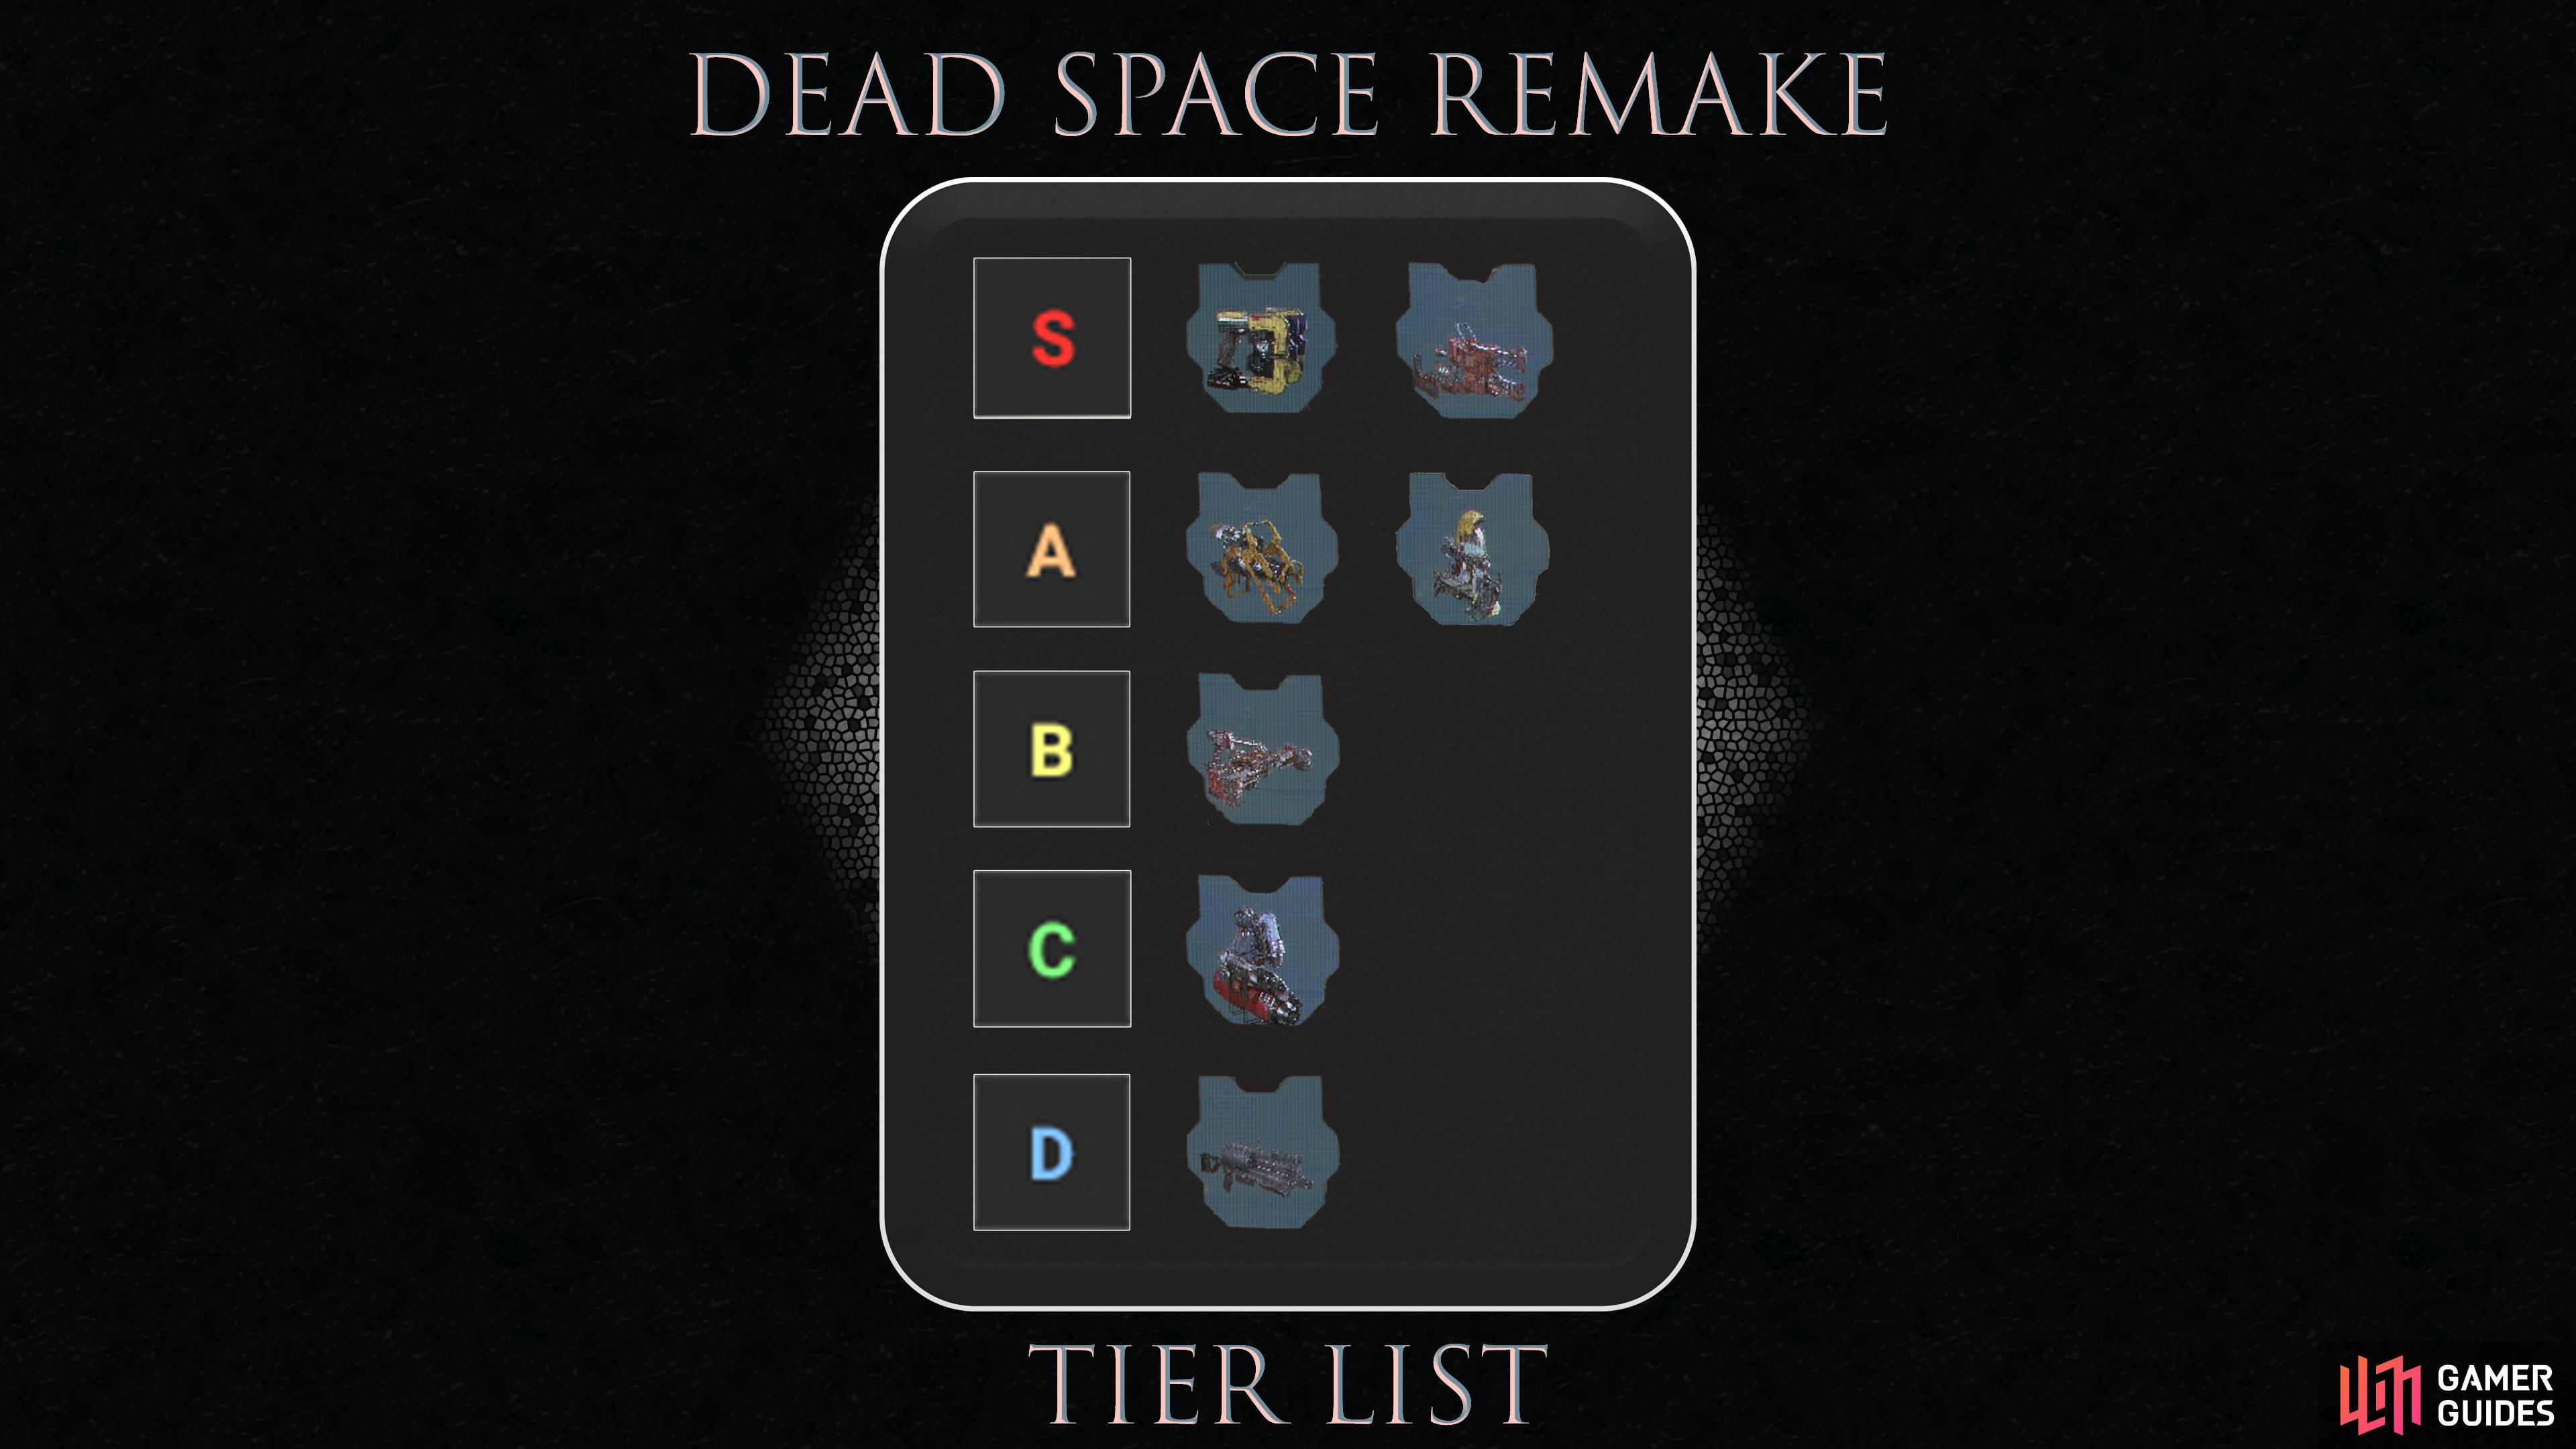 A Tier List for all weapons in Dead Space Remake.